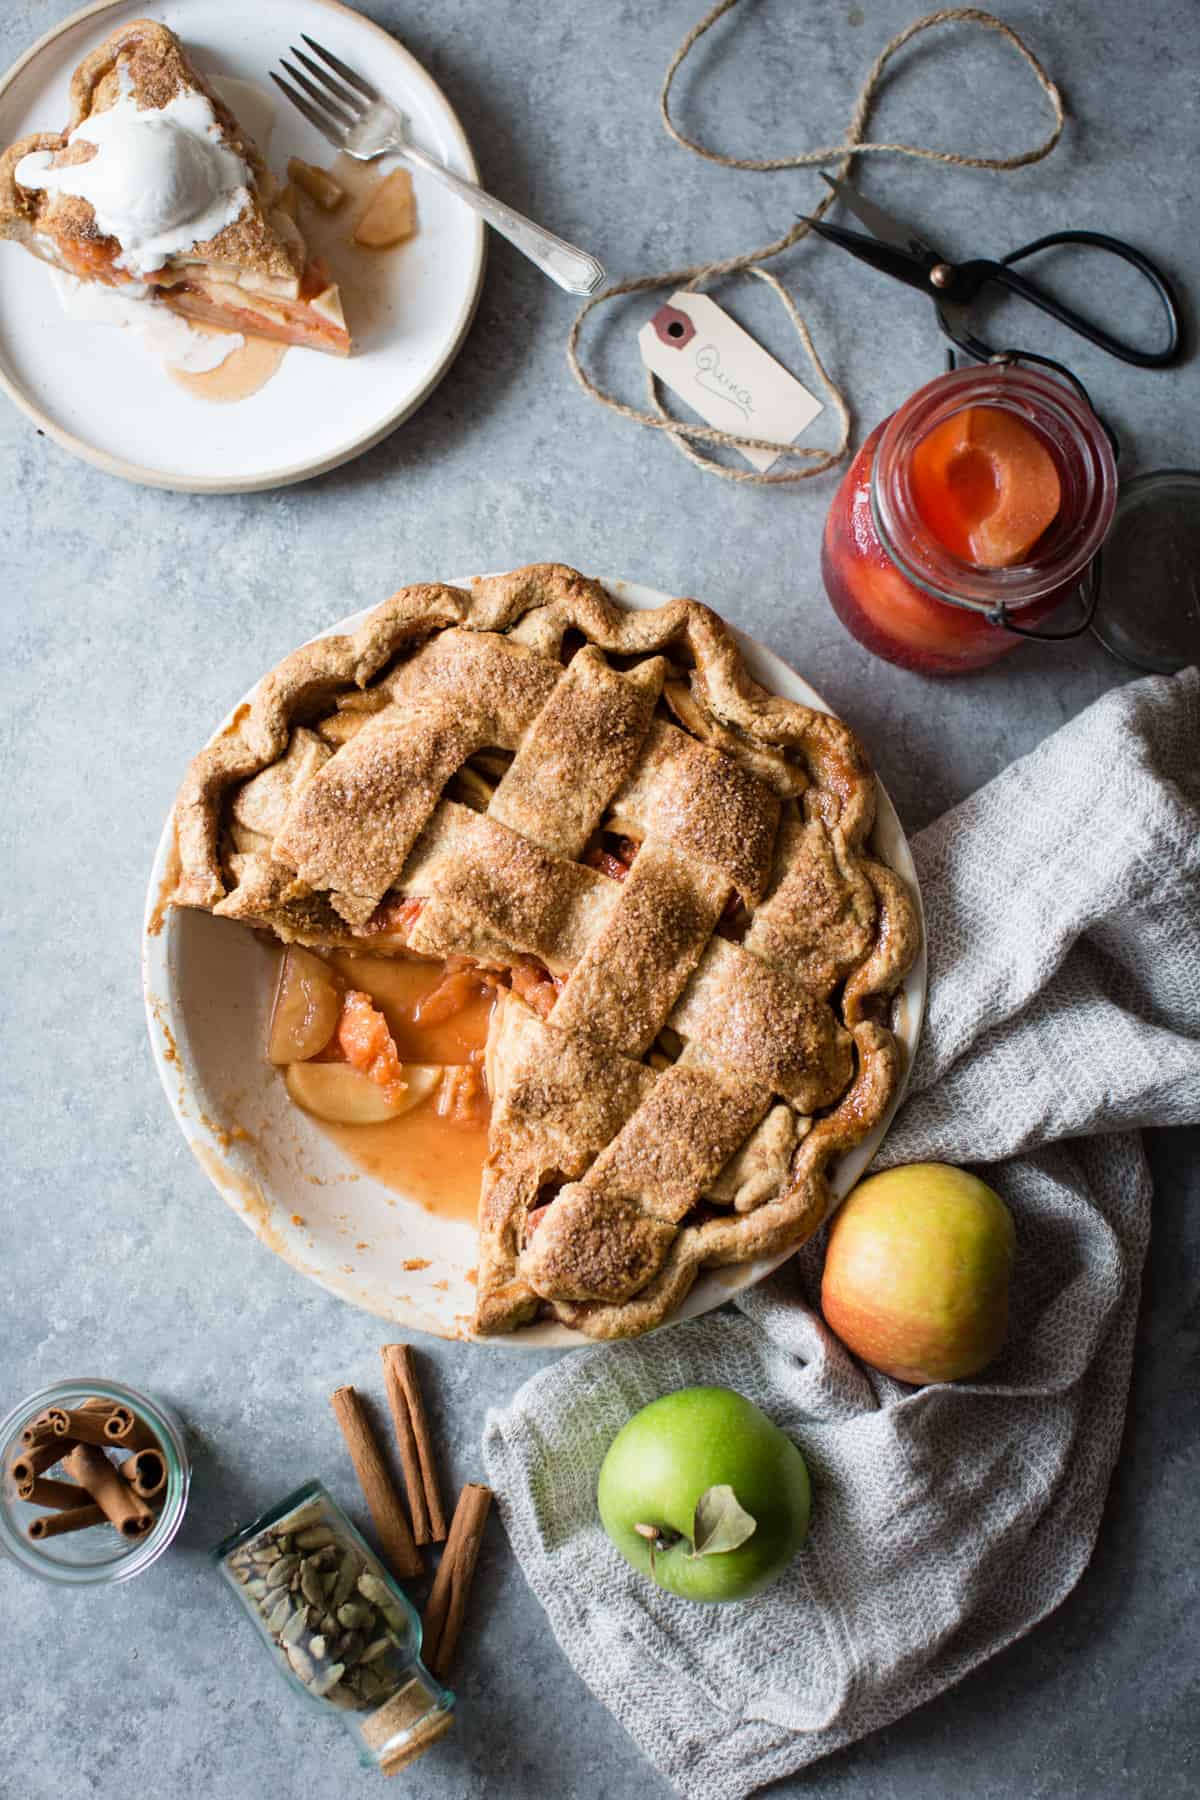 delicious Gluten Free Apple Pie with Spiced Poached Quince